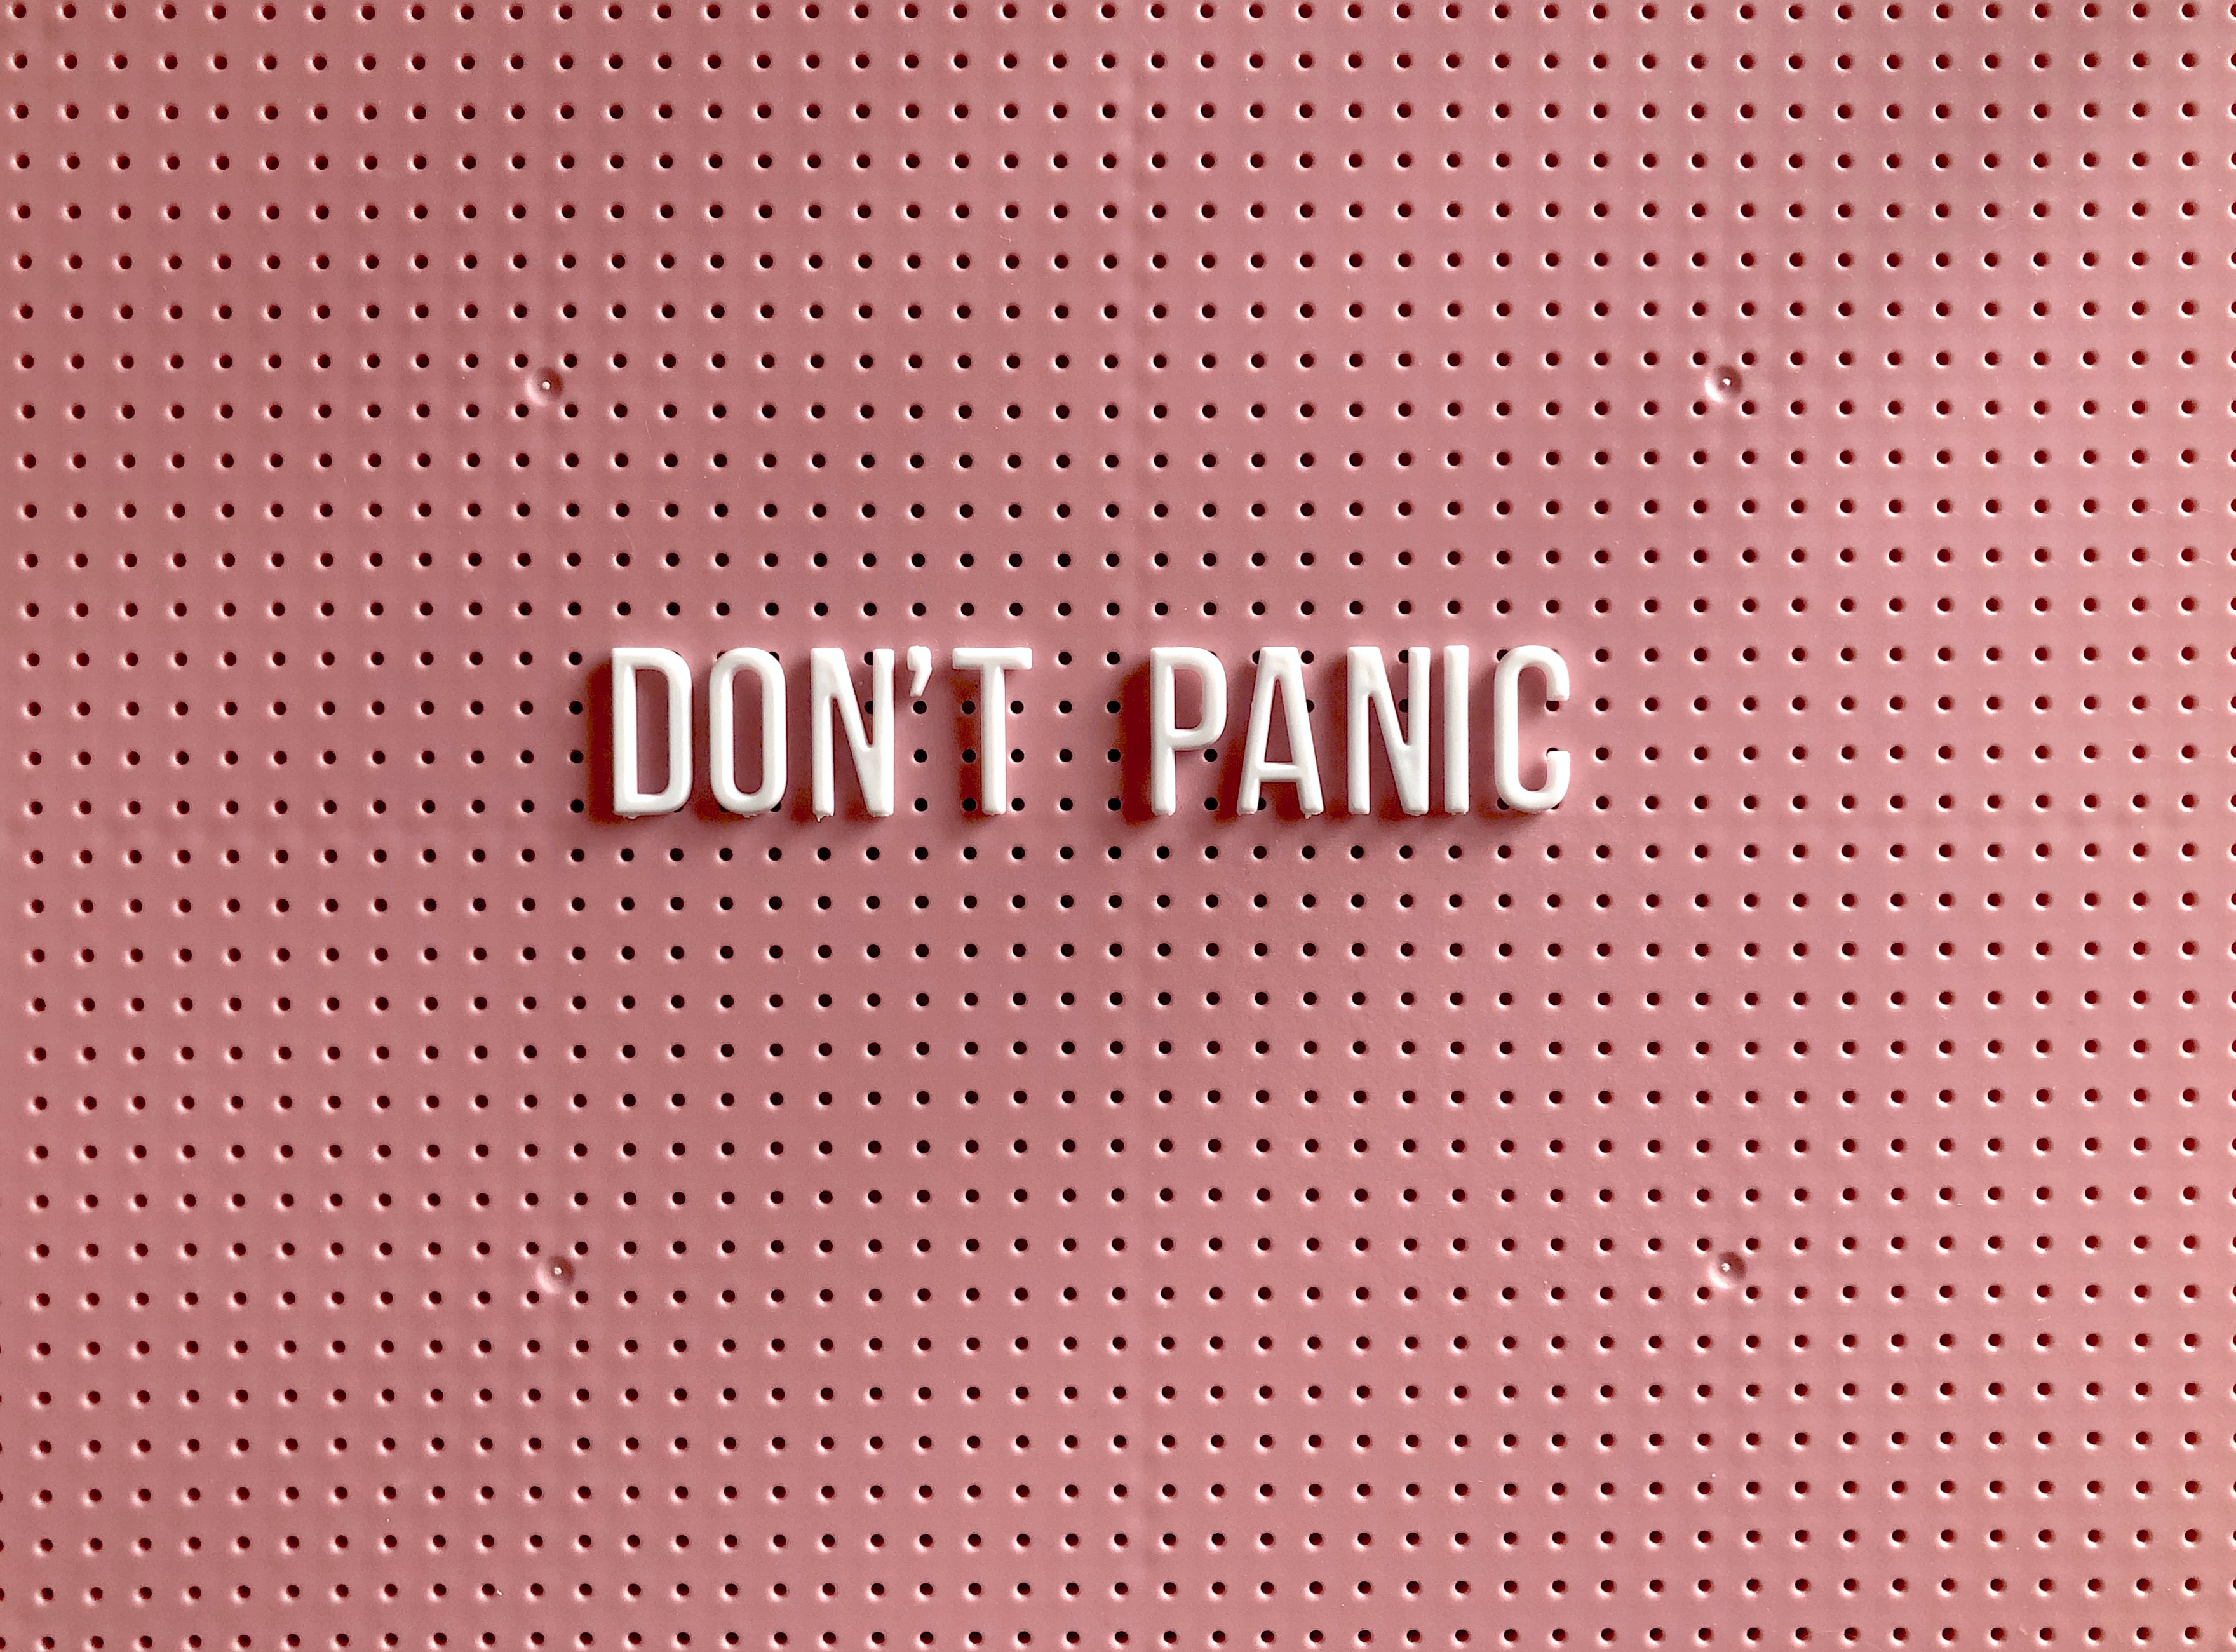 A pink peg board with white letters pegged into it spelling Don't Panic  